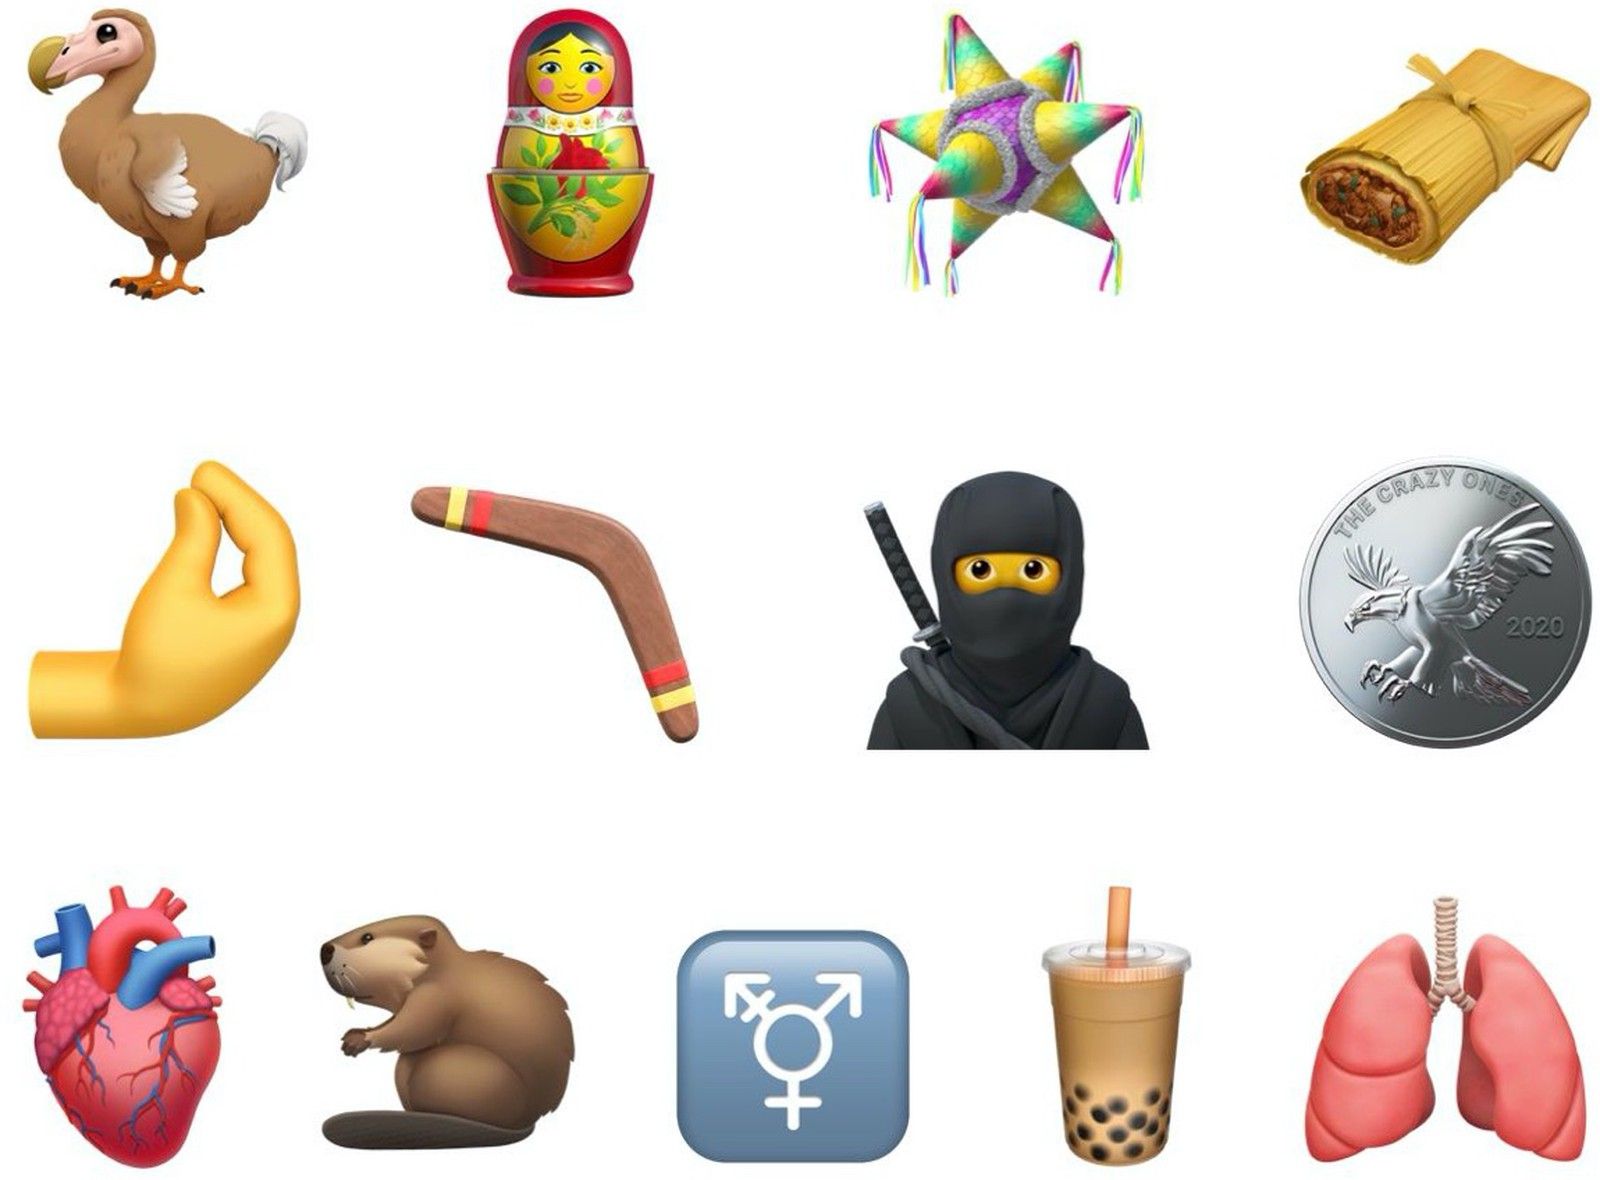 Apple Releases iOS 14.2 With New Emoji, Wallpaper, Bug Fixes, And More